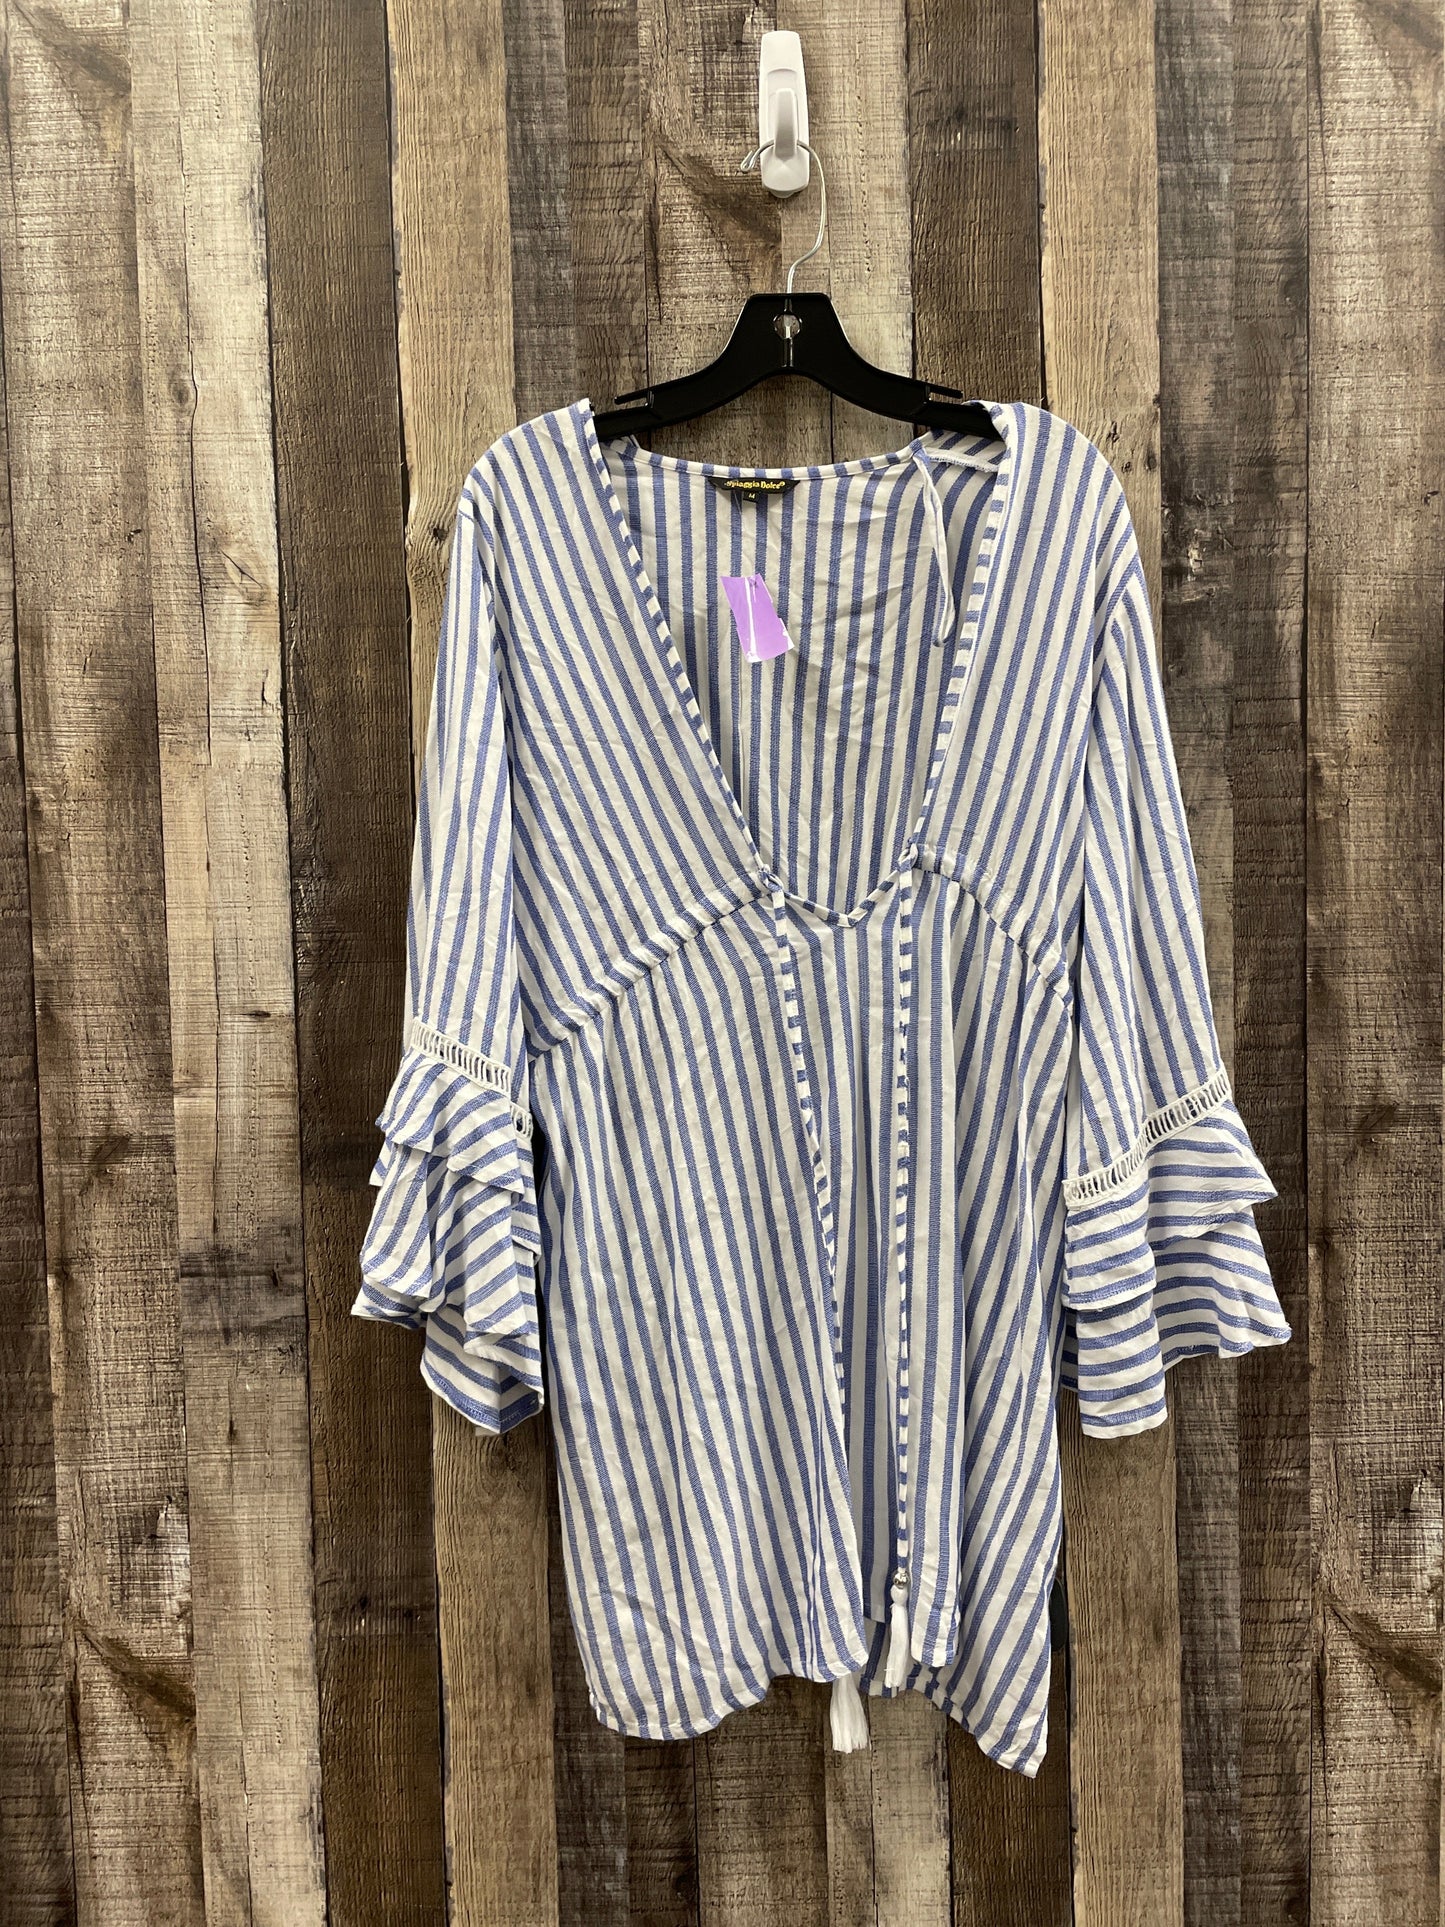 Striped Pattern Dress Casual Short Cme, Size M